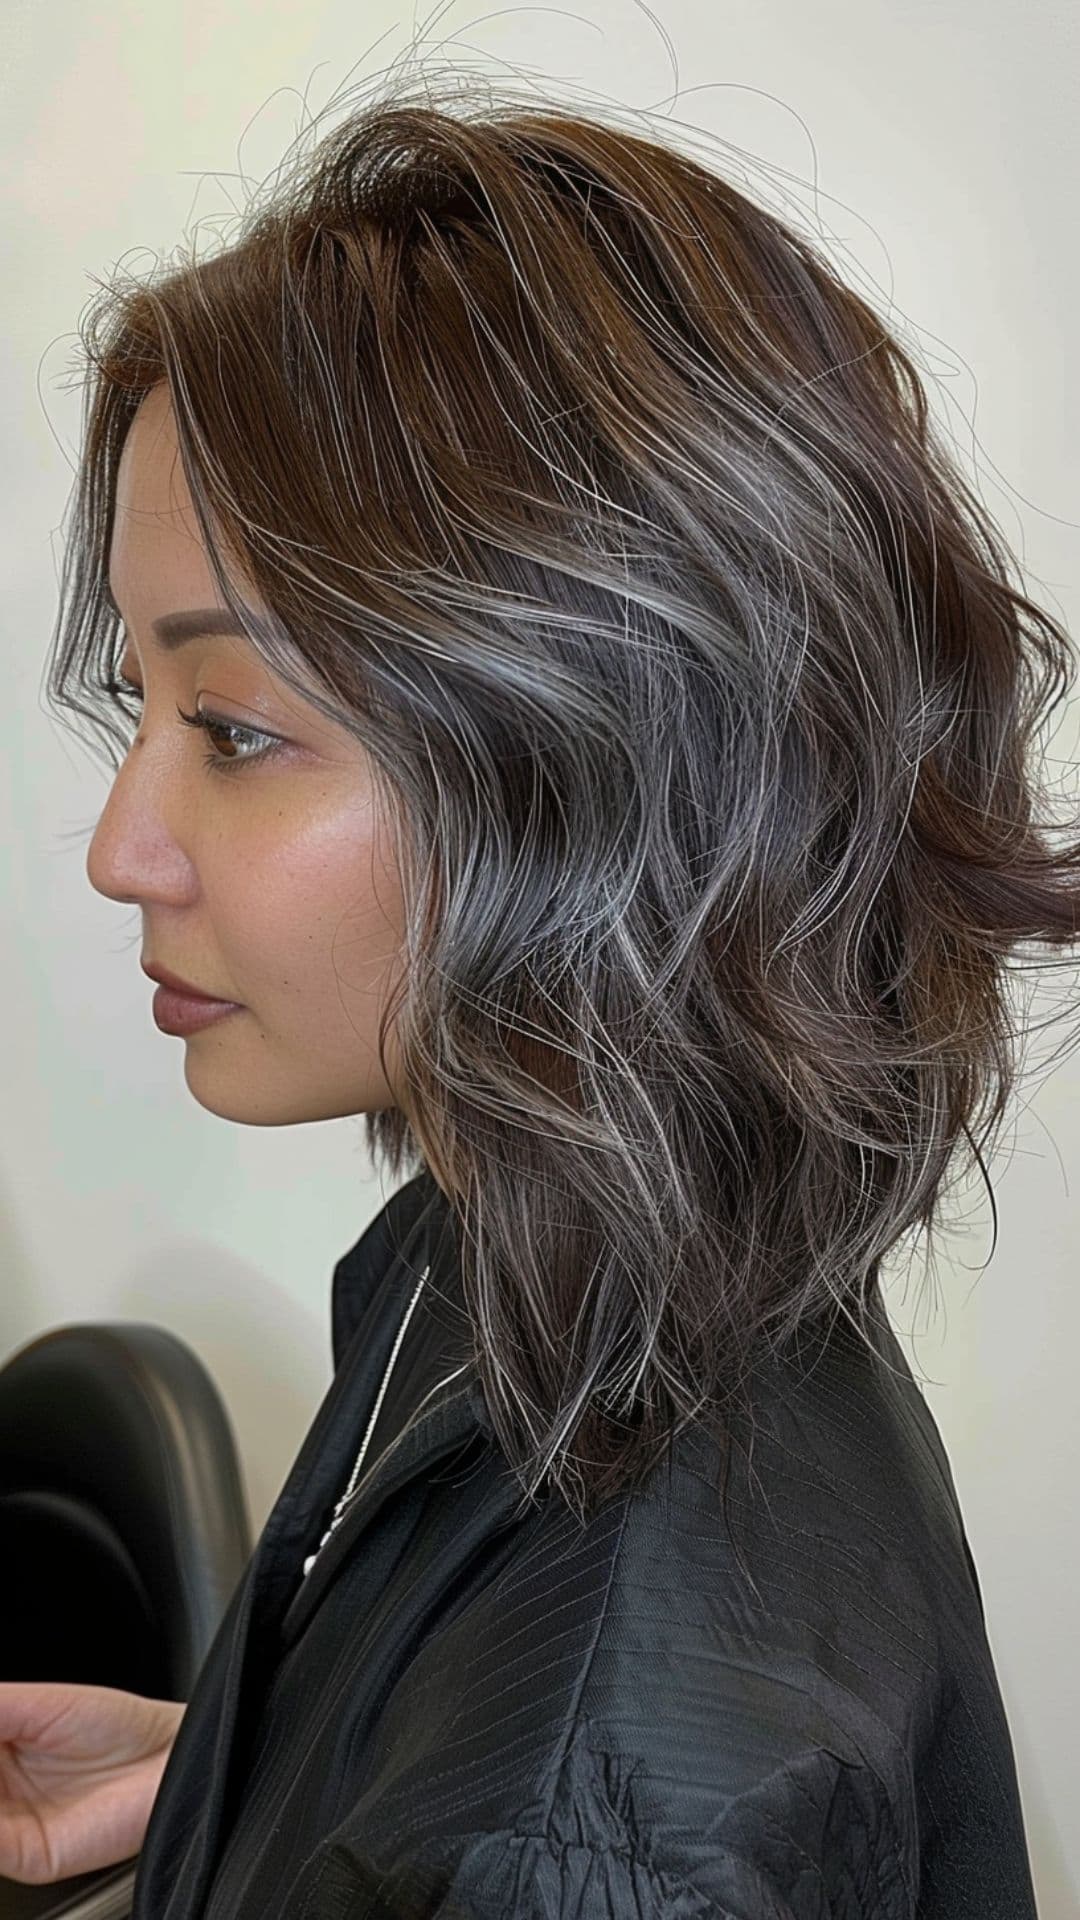 A woman modelling a black hair with silver highlights.